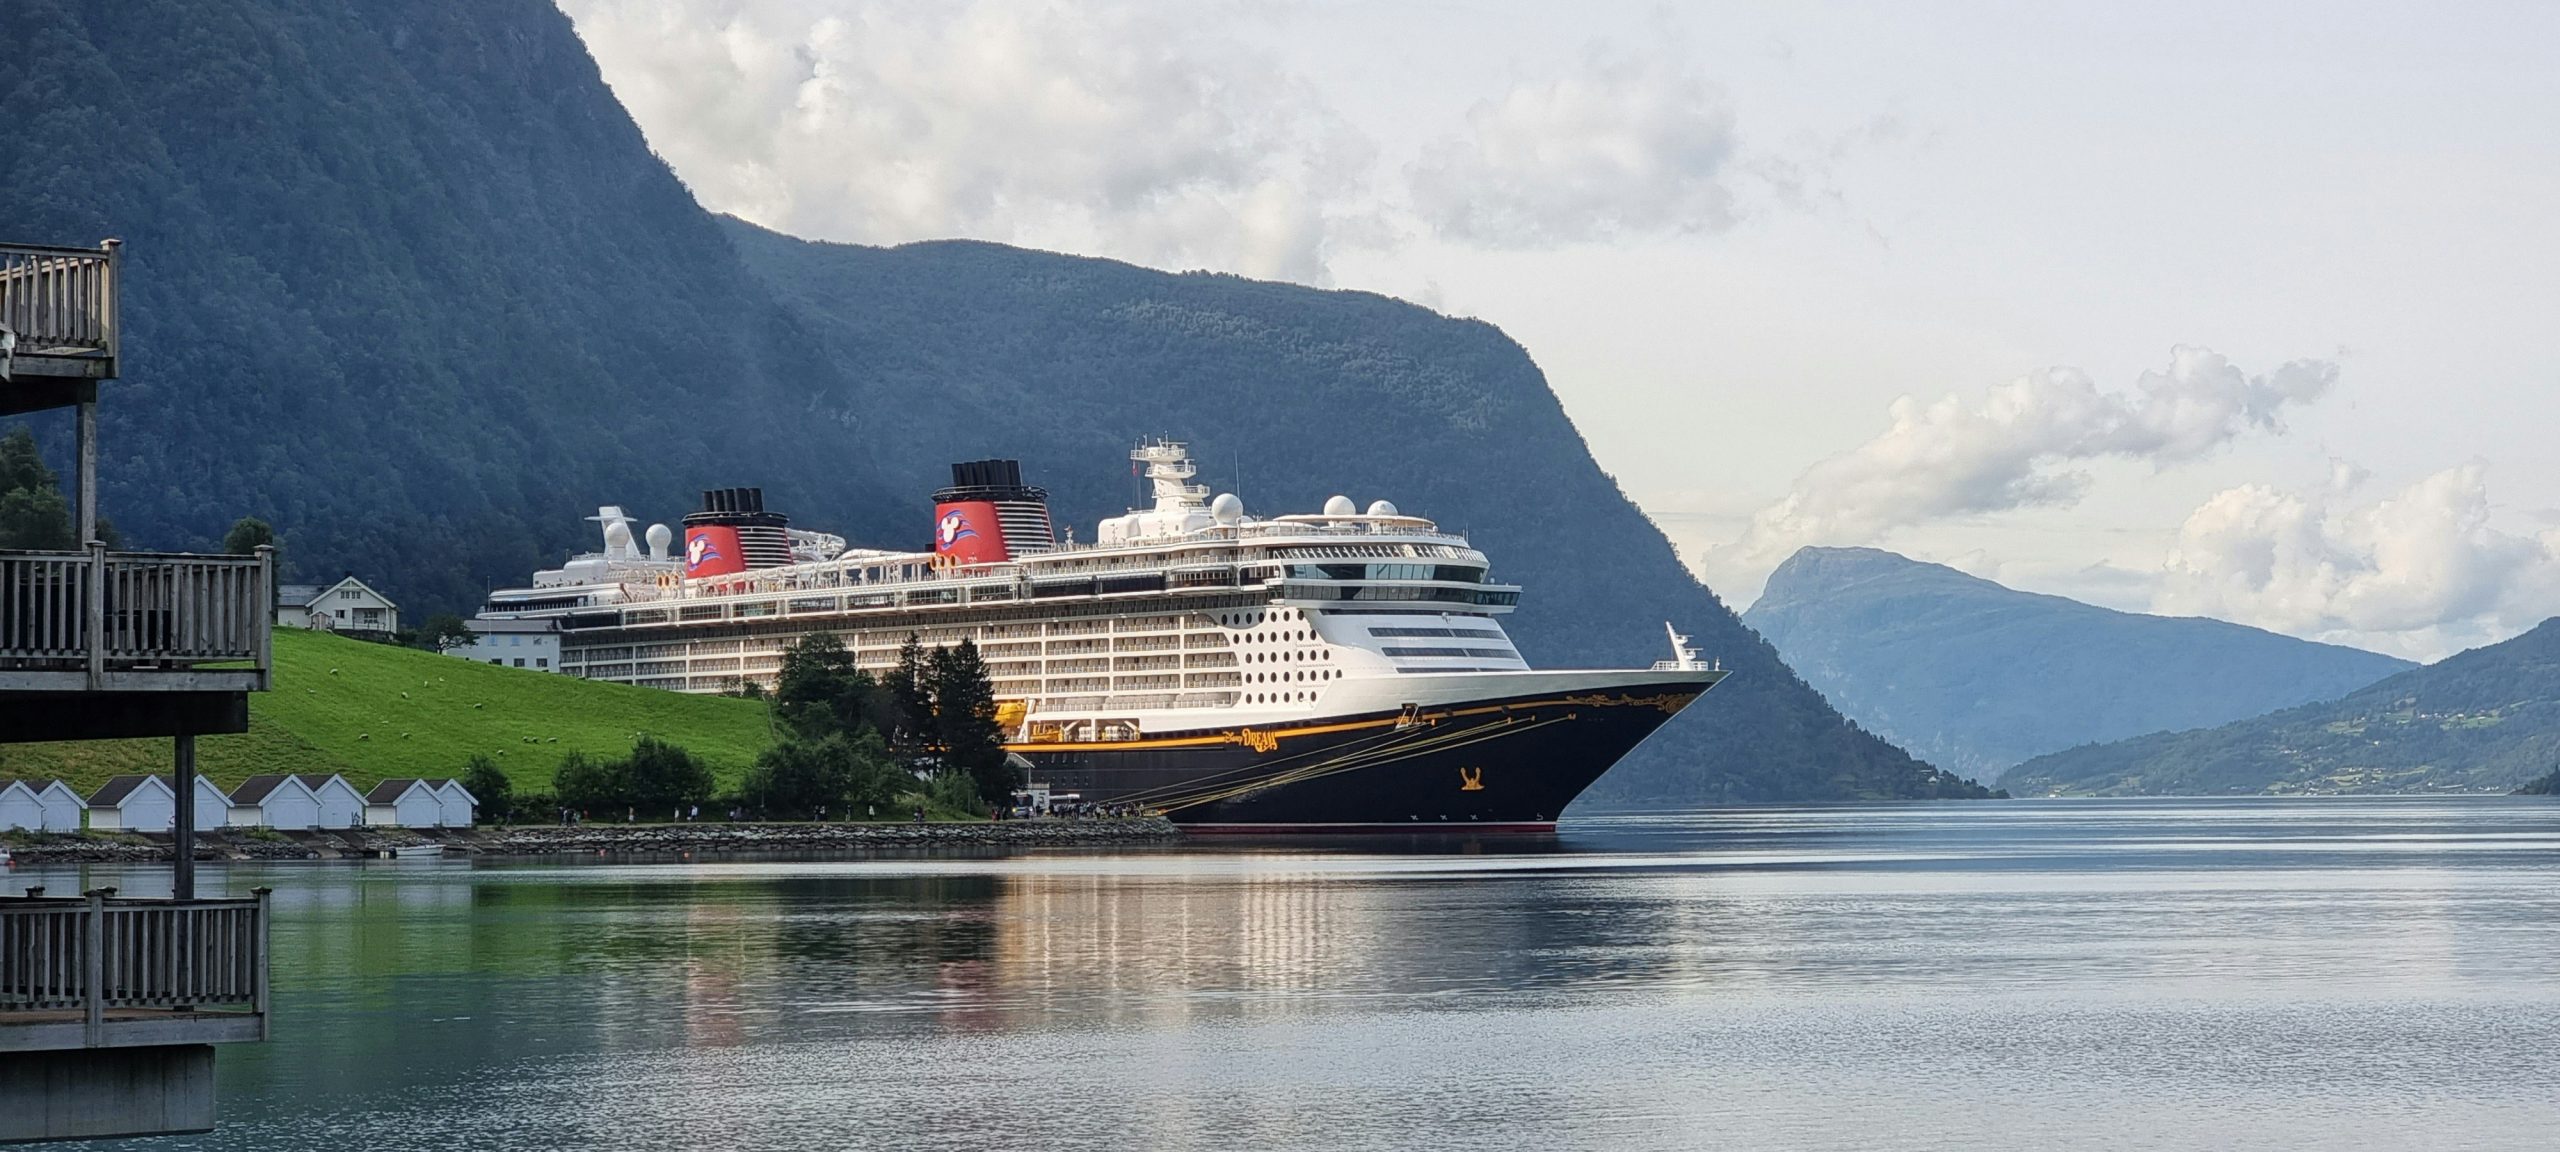 explore breathtaking fjords on a scenic cruise and immerse yourself in the beauty of nature with fjord cruises. book now for an unforgettable adventure.